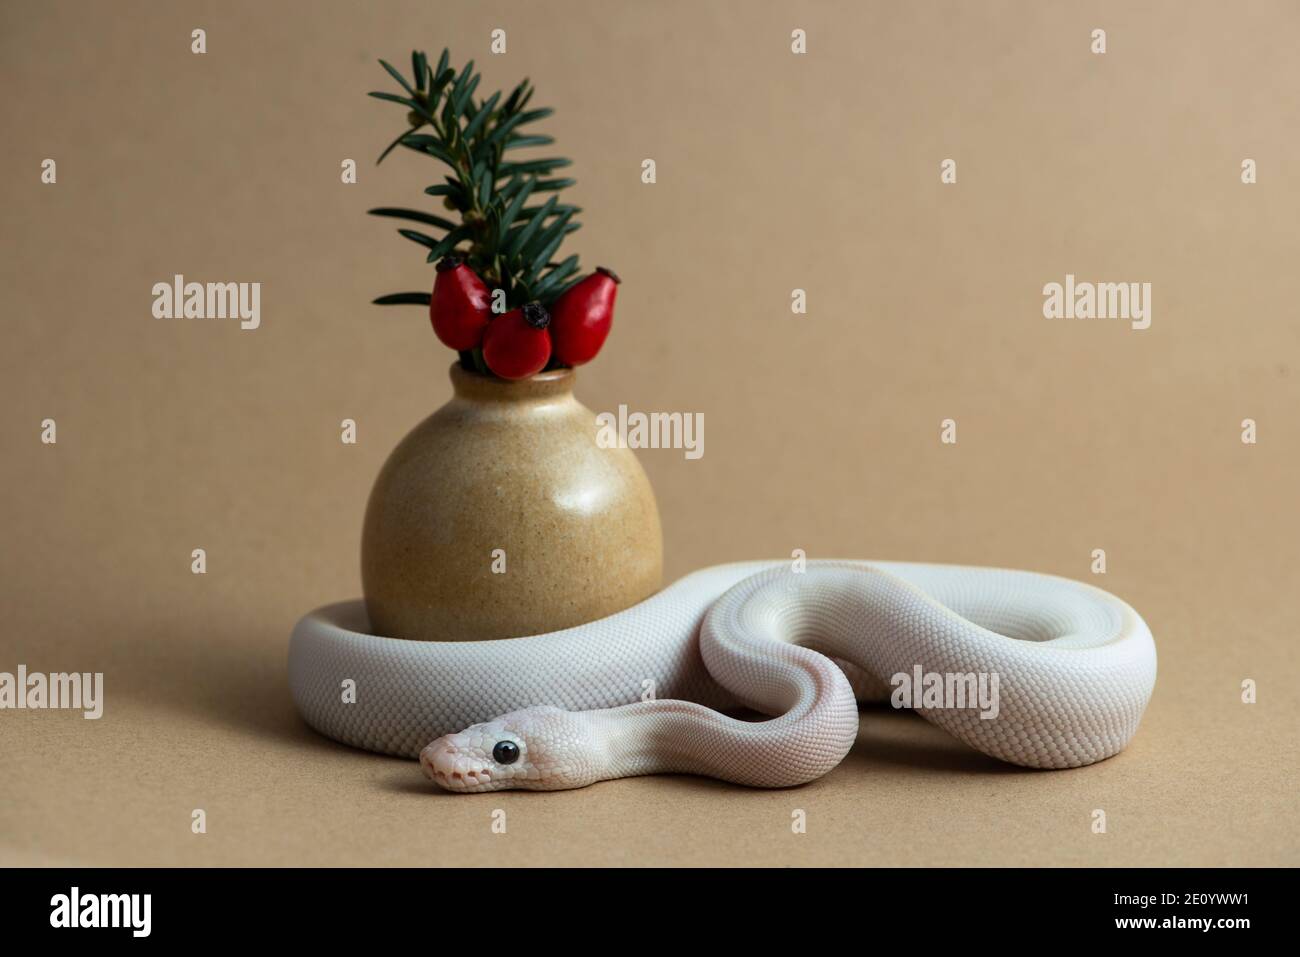 Baby leucistic ball python with rosehip and jew. Stock Photo